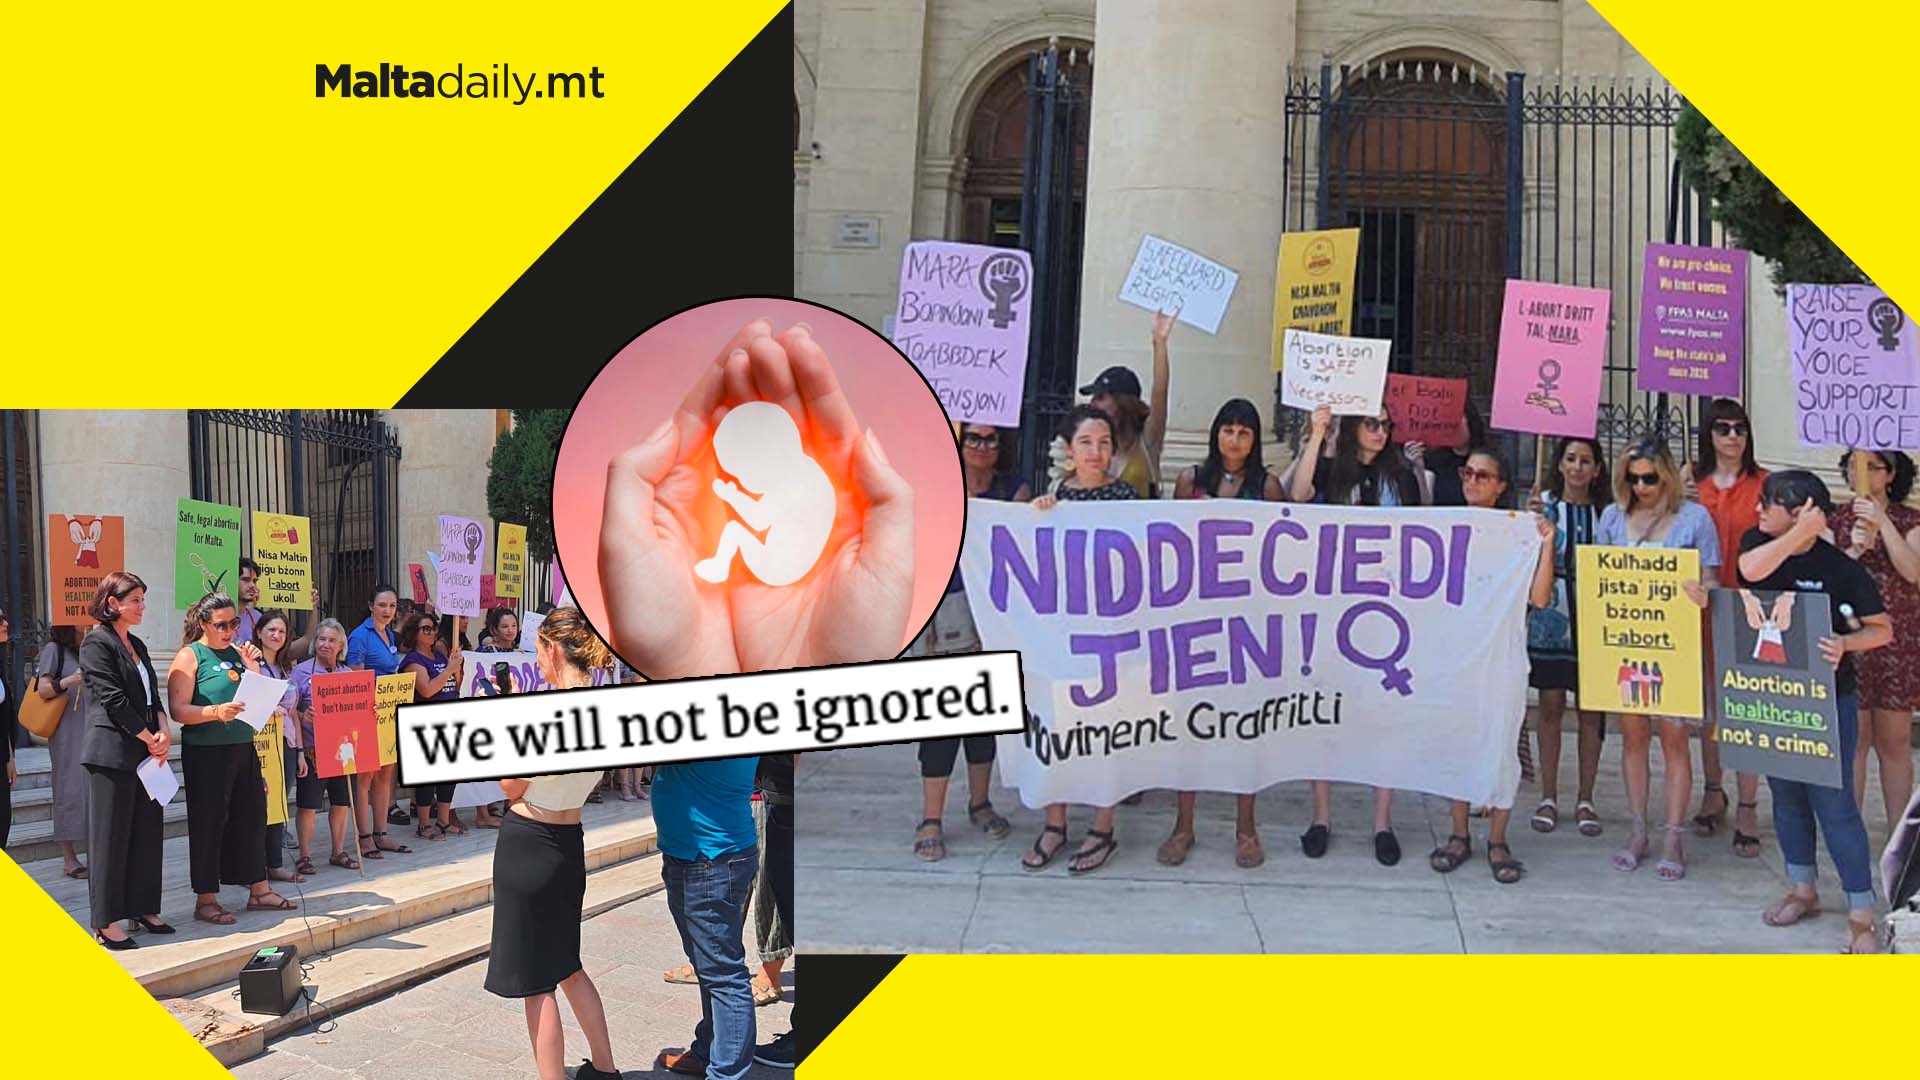 Judicial protest by Maltese women to decriminalise and legalise abortion